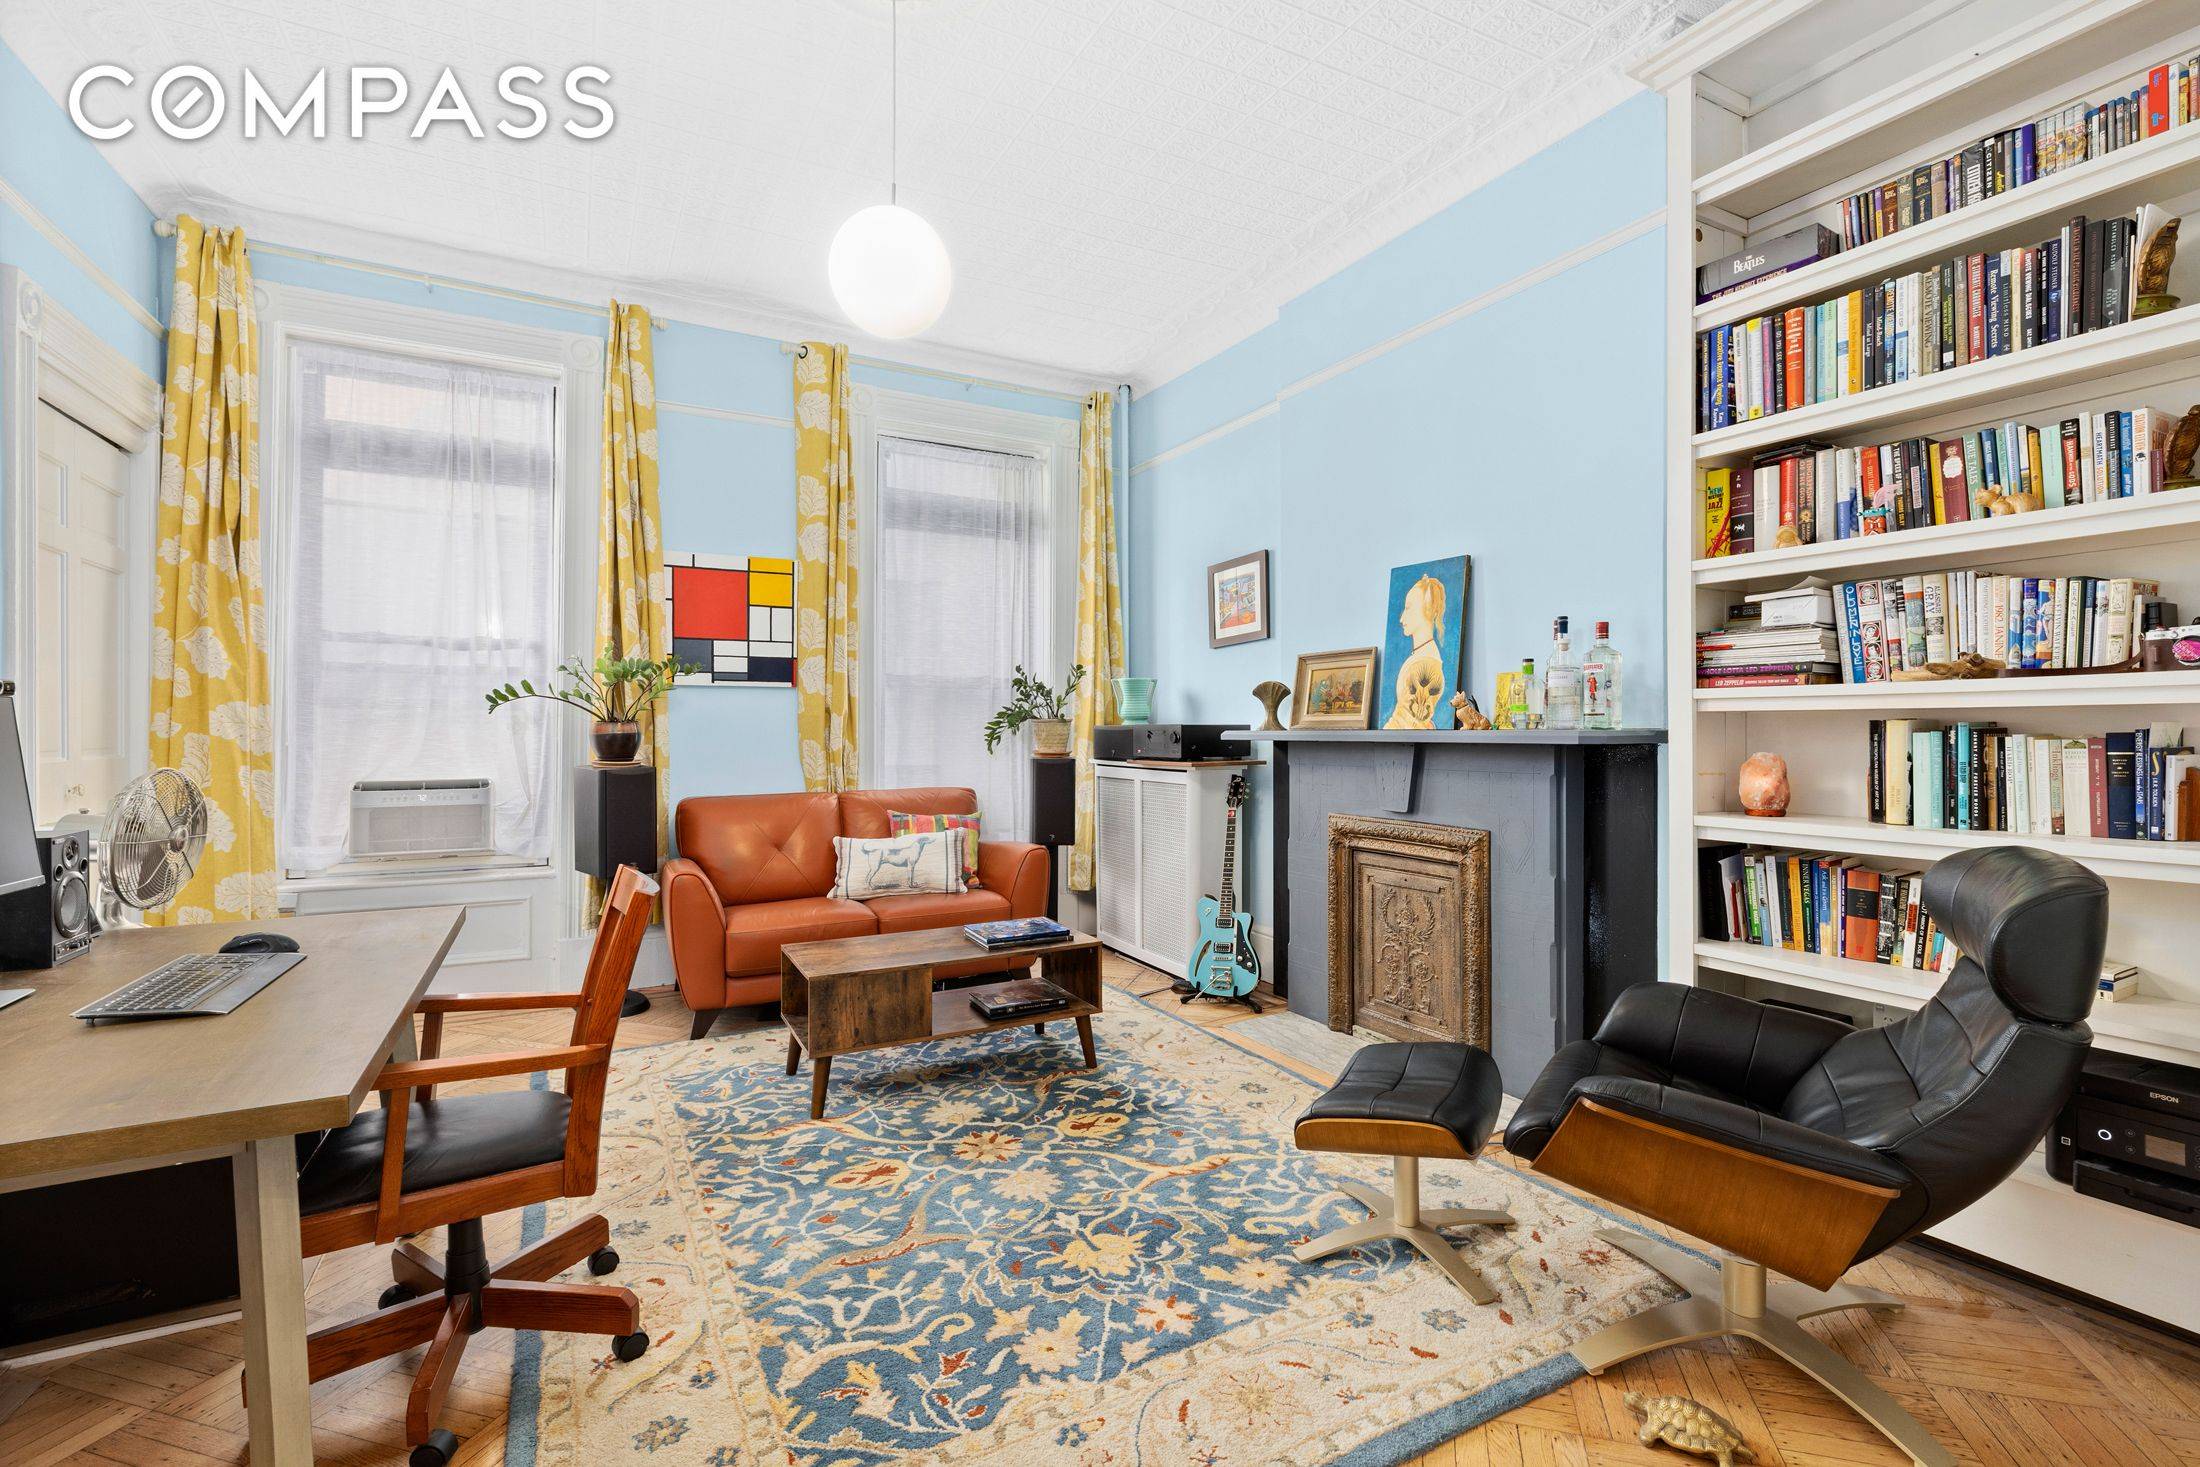 Apt 4R at 153 Joralemon St is a chic, stylish 1 bed 1 bath co op in the heart of Brooklyn Heights.